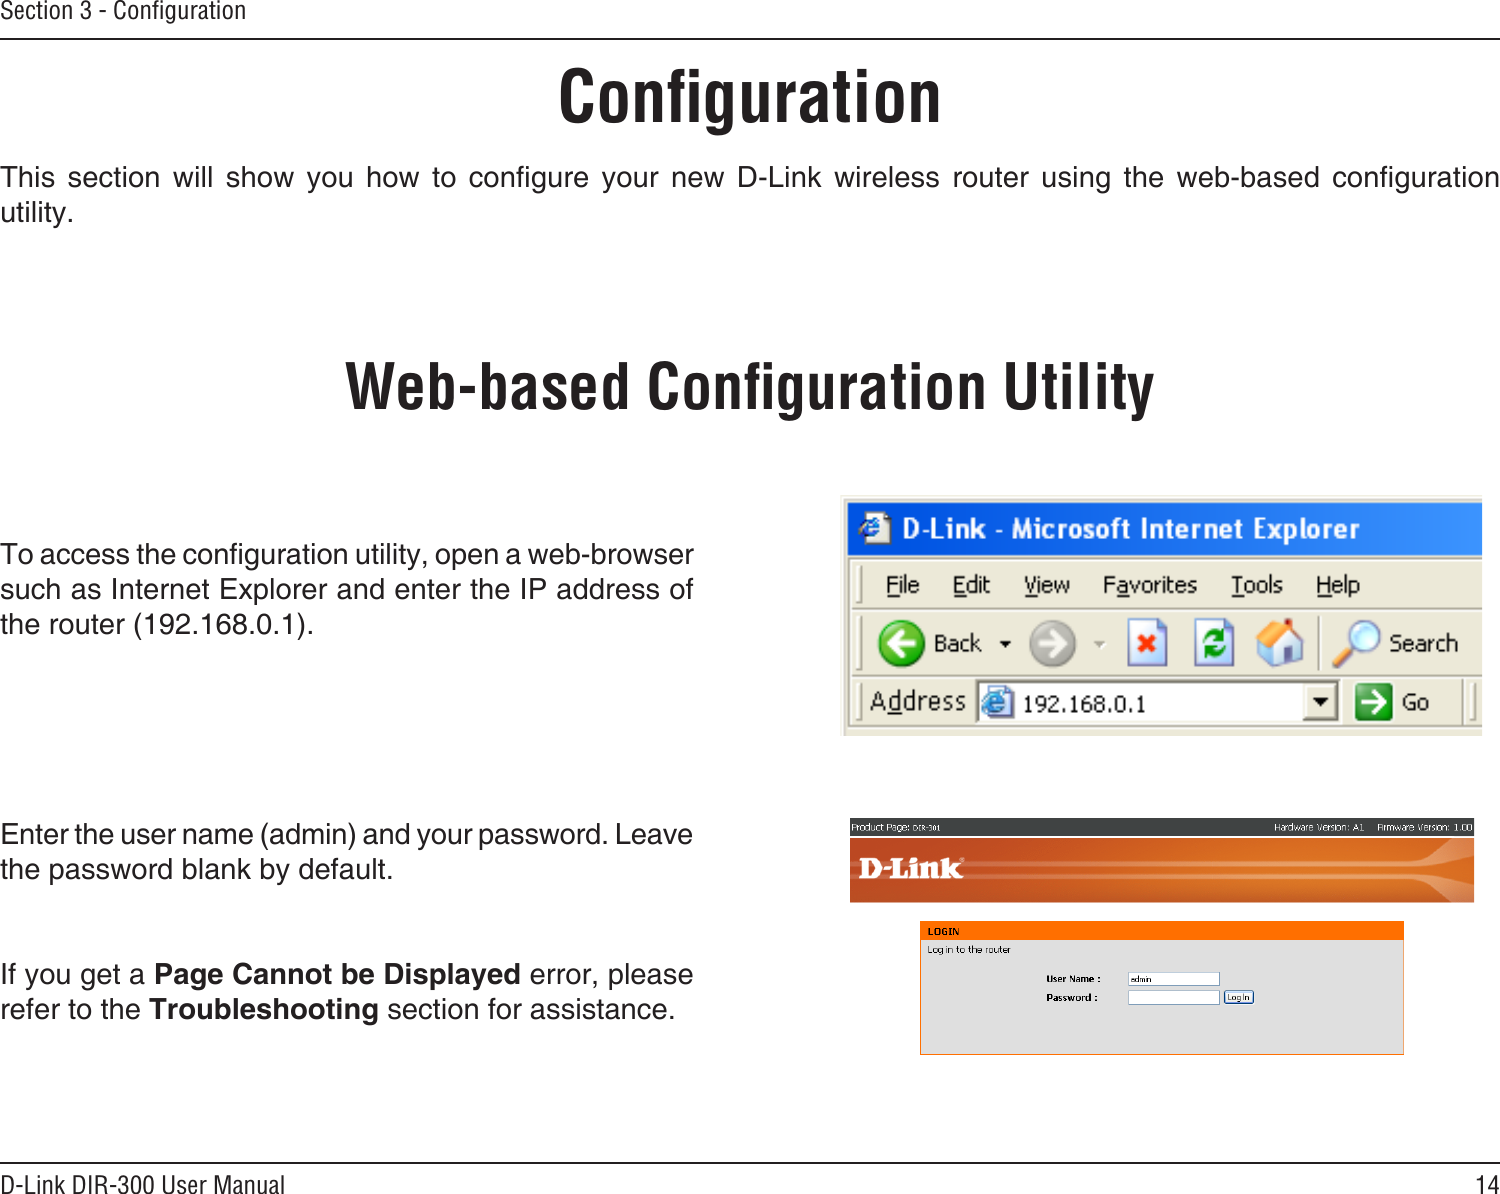 14D-Link DIR-300 User ManualSection 3 - ConﬁgurationConﬁgurationThis  section  will  show  you  how  to  congure  your  new  D-Link  wireless  router  using  the  web-based  conguration utility.Web-based Conﬁguration UtilityTo access the conguration utility, open a web-browser such as Internet Explorer and enter the IP address of the router (192.168.0.1).Enter the user name (admin) and your password. Leave the password blank by default.If you get a Page Cannot be Displayed error, please refer to the Troubleshooting section for assistance.